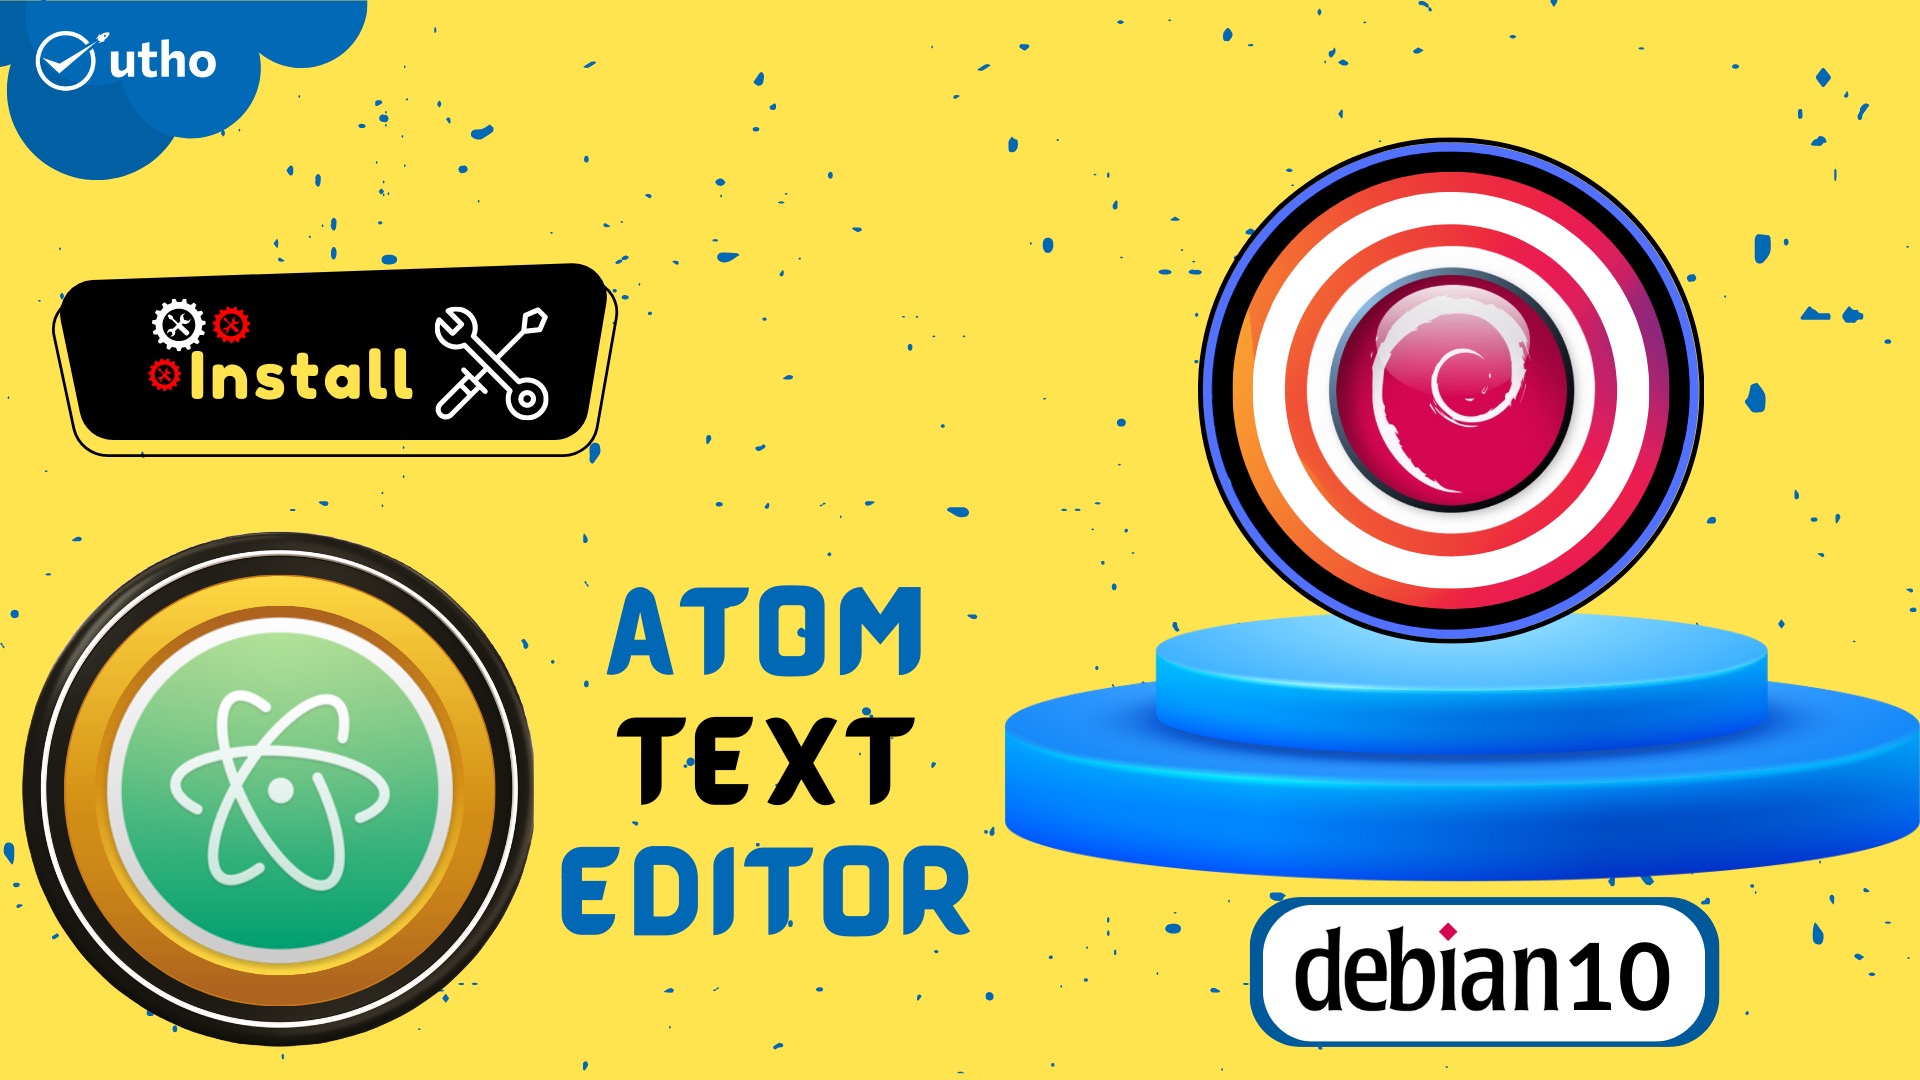 How to install Atom Text Editor on Debian 10